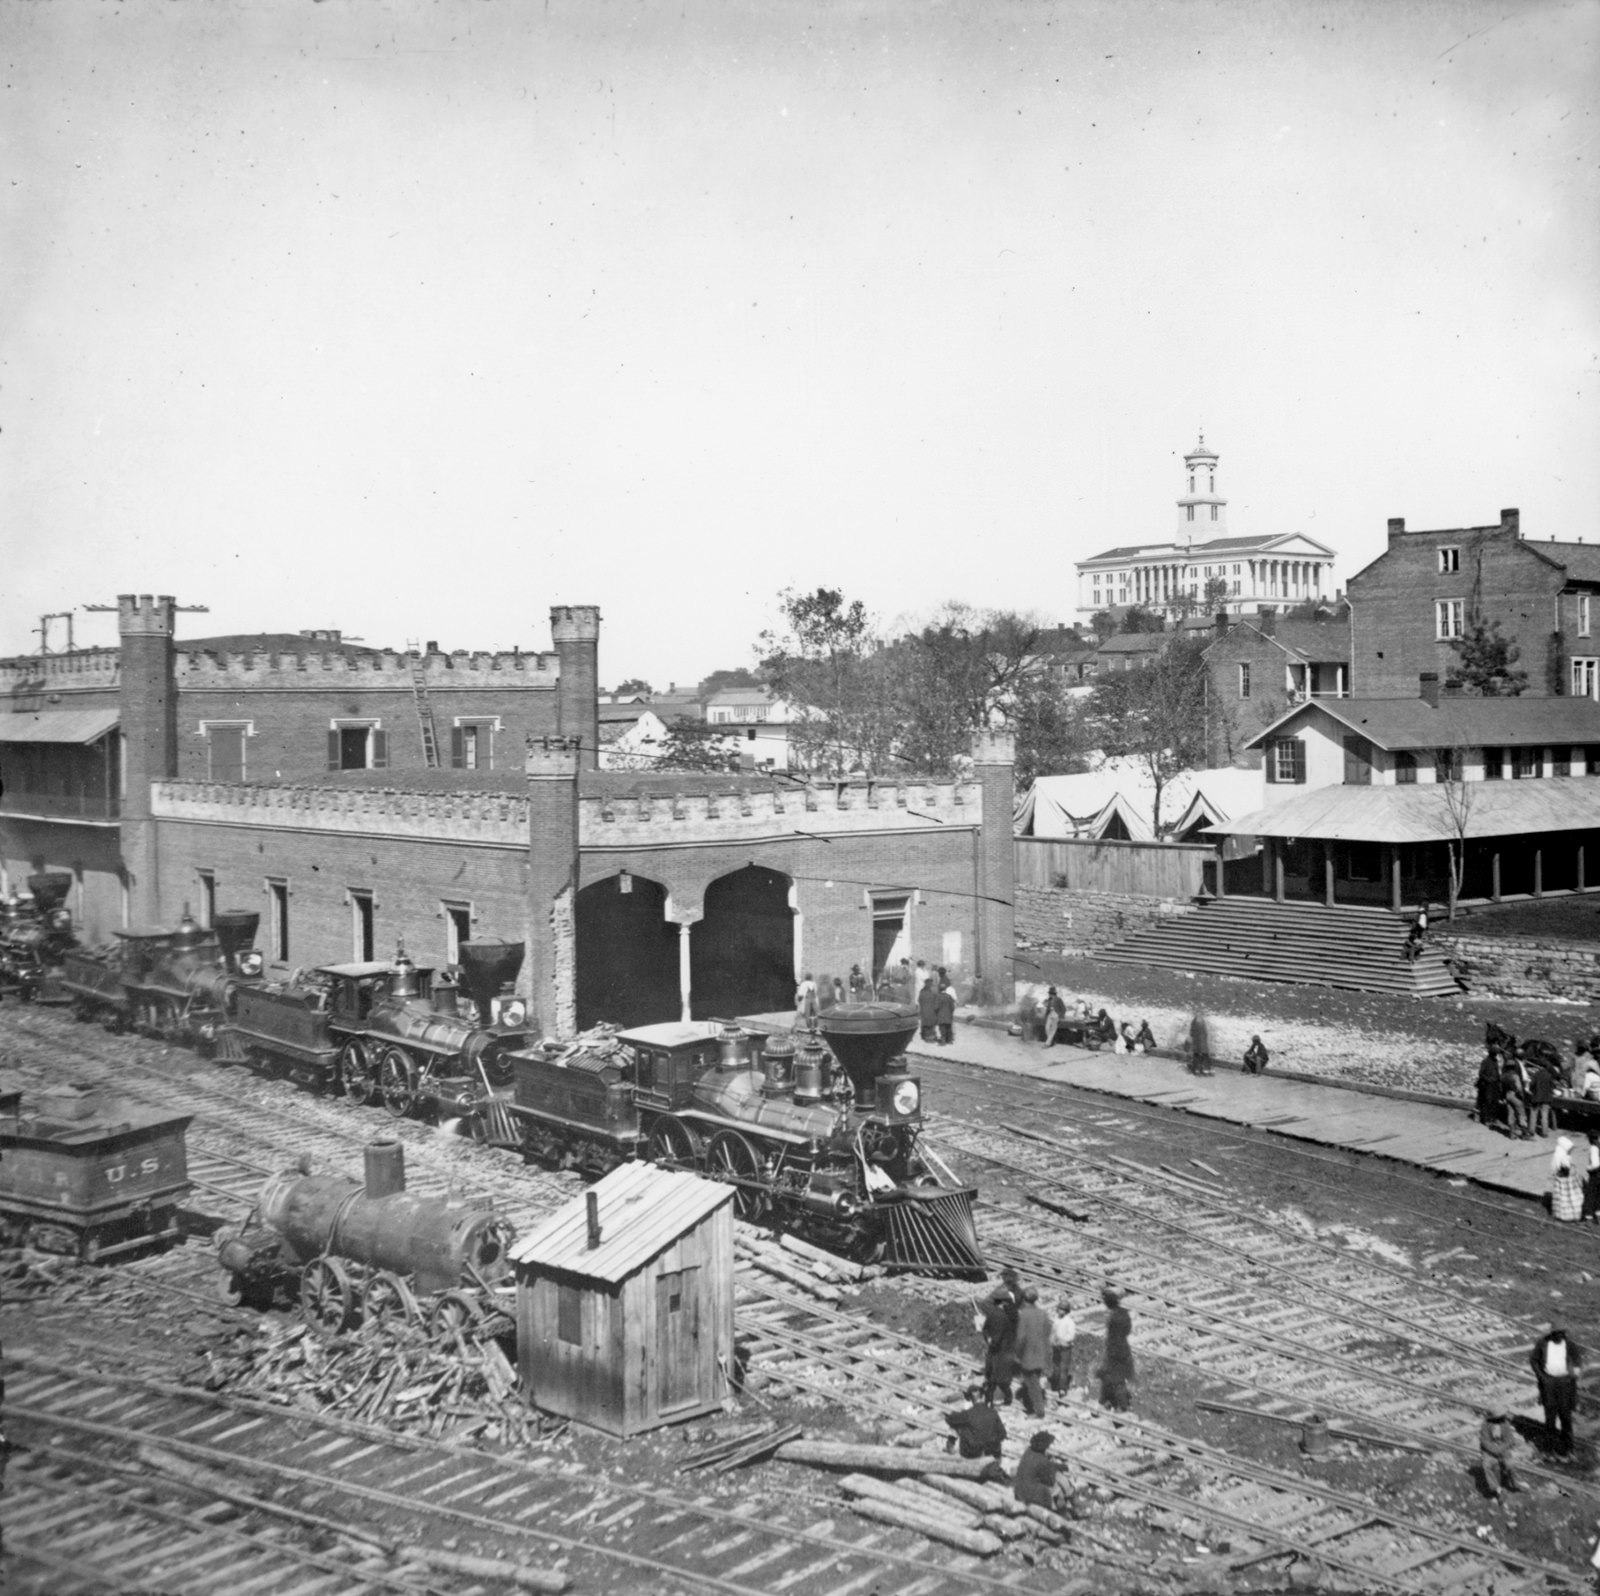 Railroad yard and depot with locomotives; the capitol in the distance, Nashville, Tenn., 1864